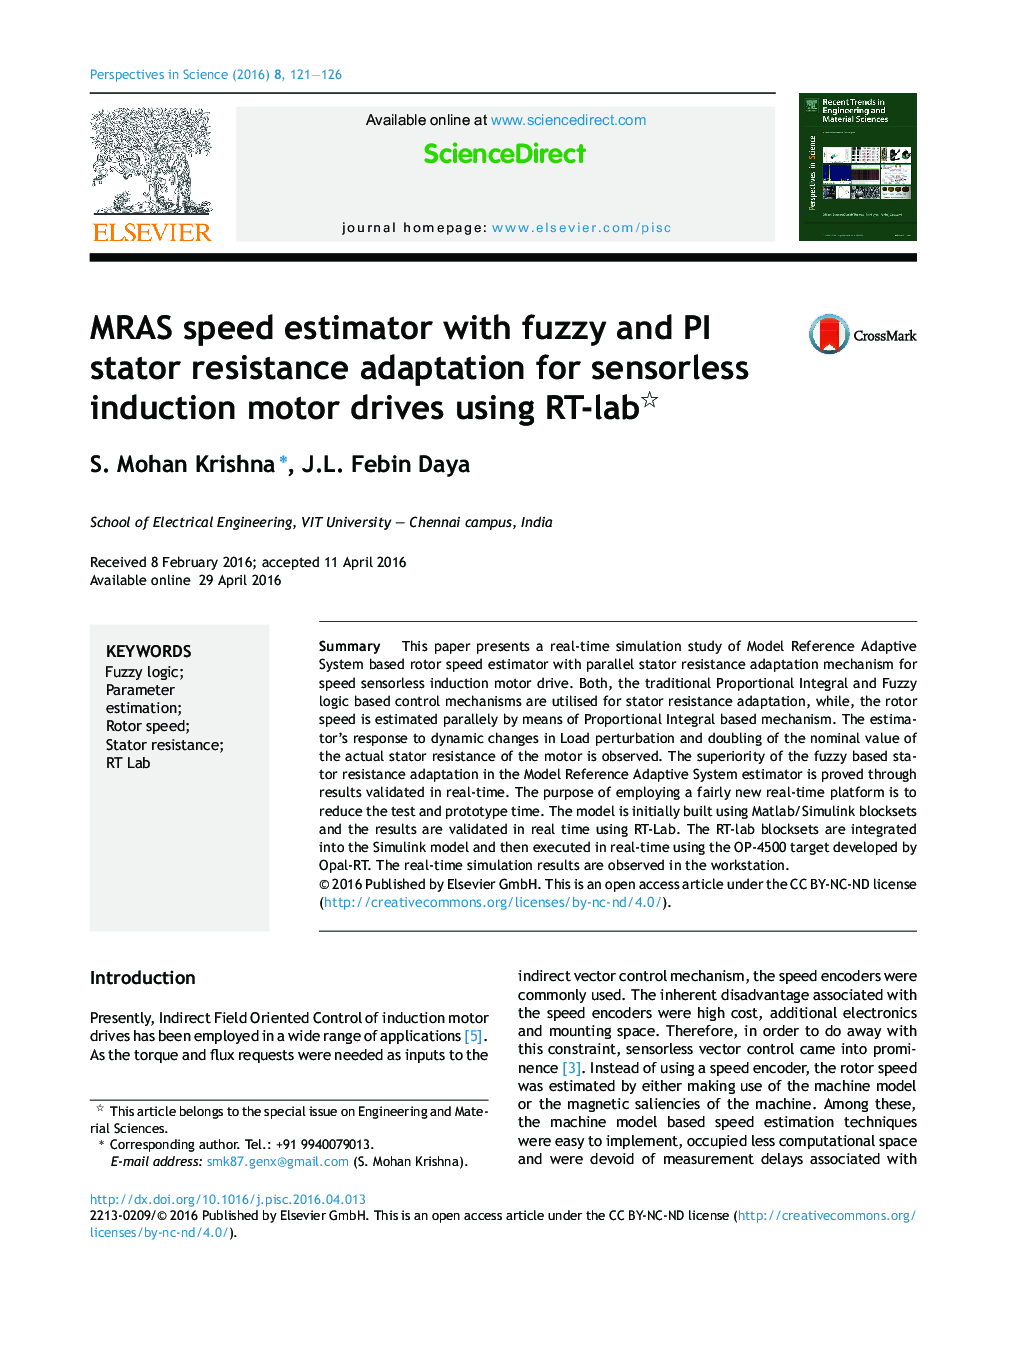 MRAS speed estimator with fuzzy and PI stator resistance adaptation for sensorless induction motor drives using RT-lab